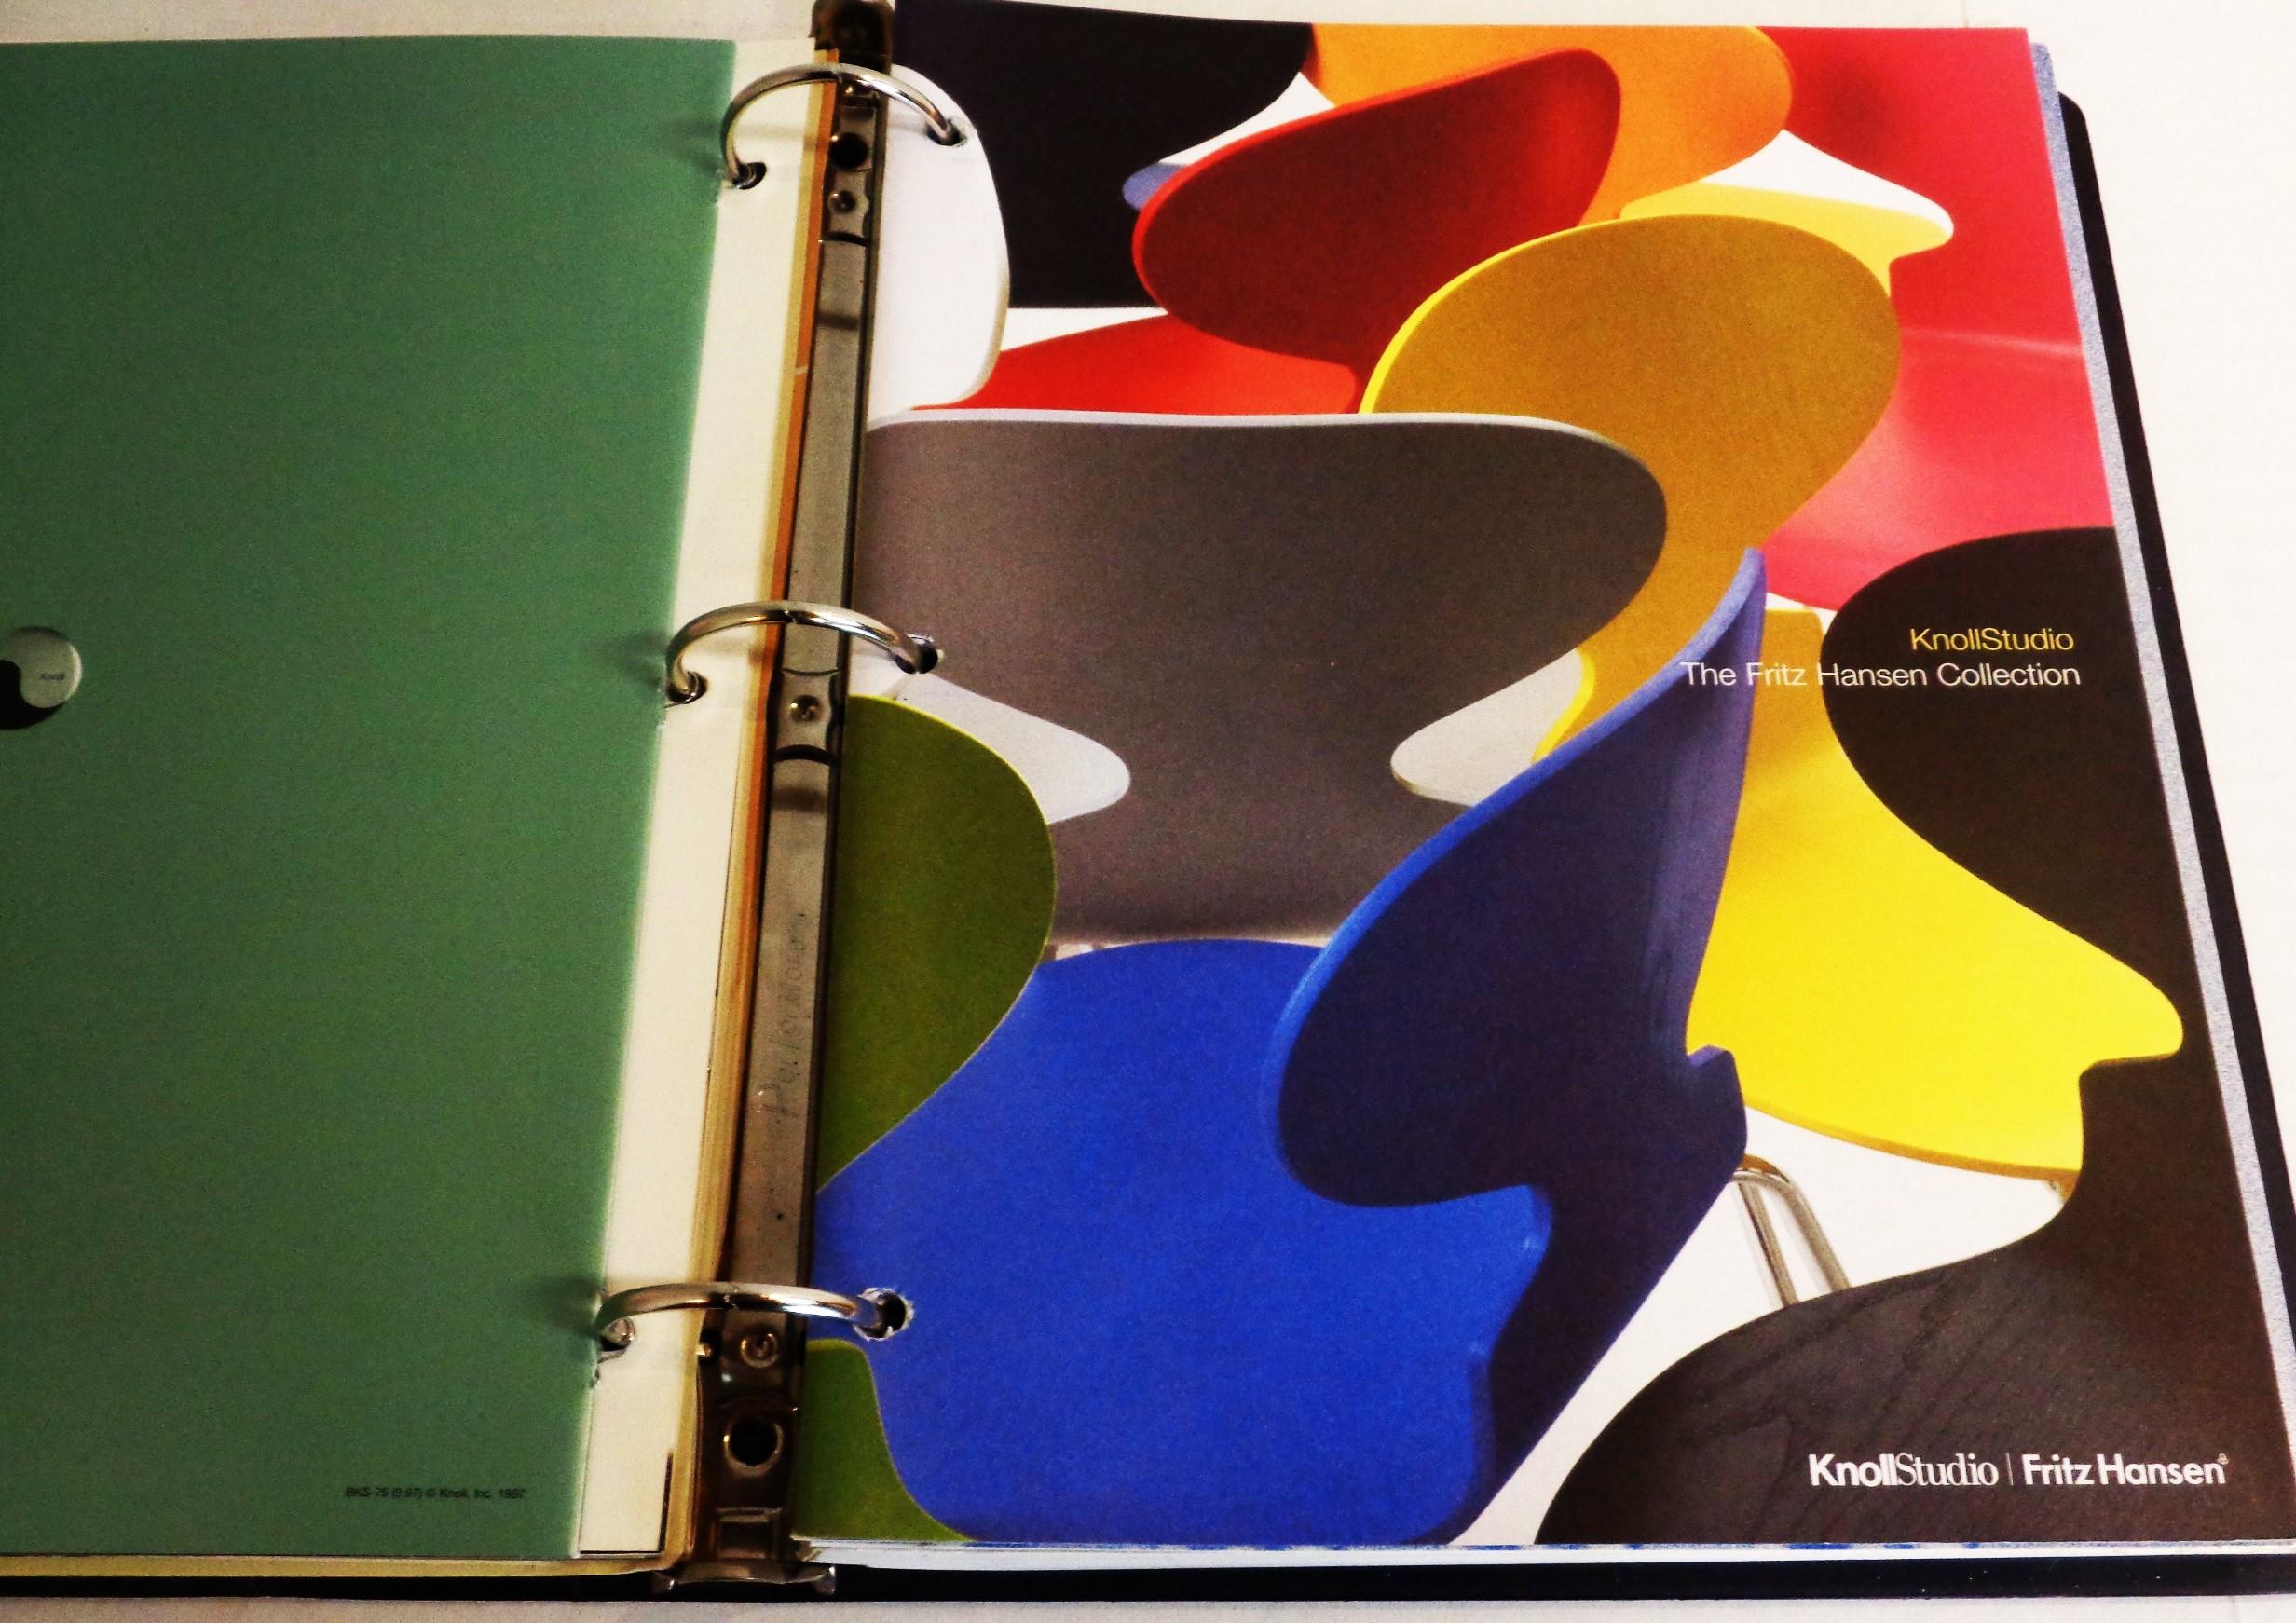 Knoll Studio Collection - Binder - Catalogues - Price List - Year 2000 For Sale 9